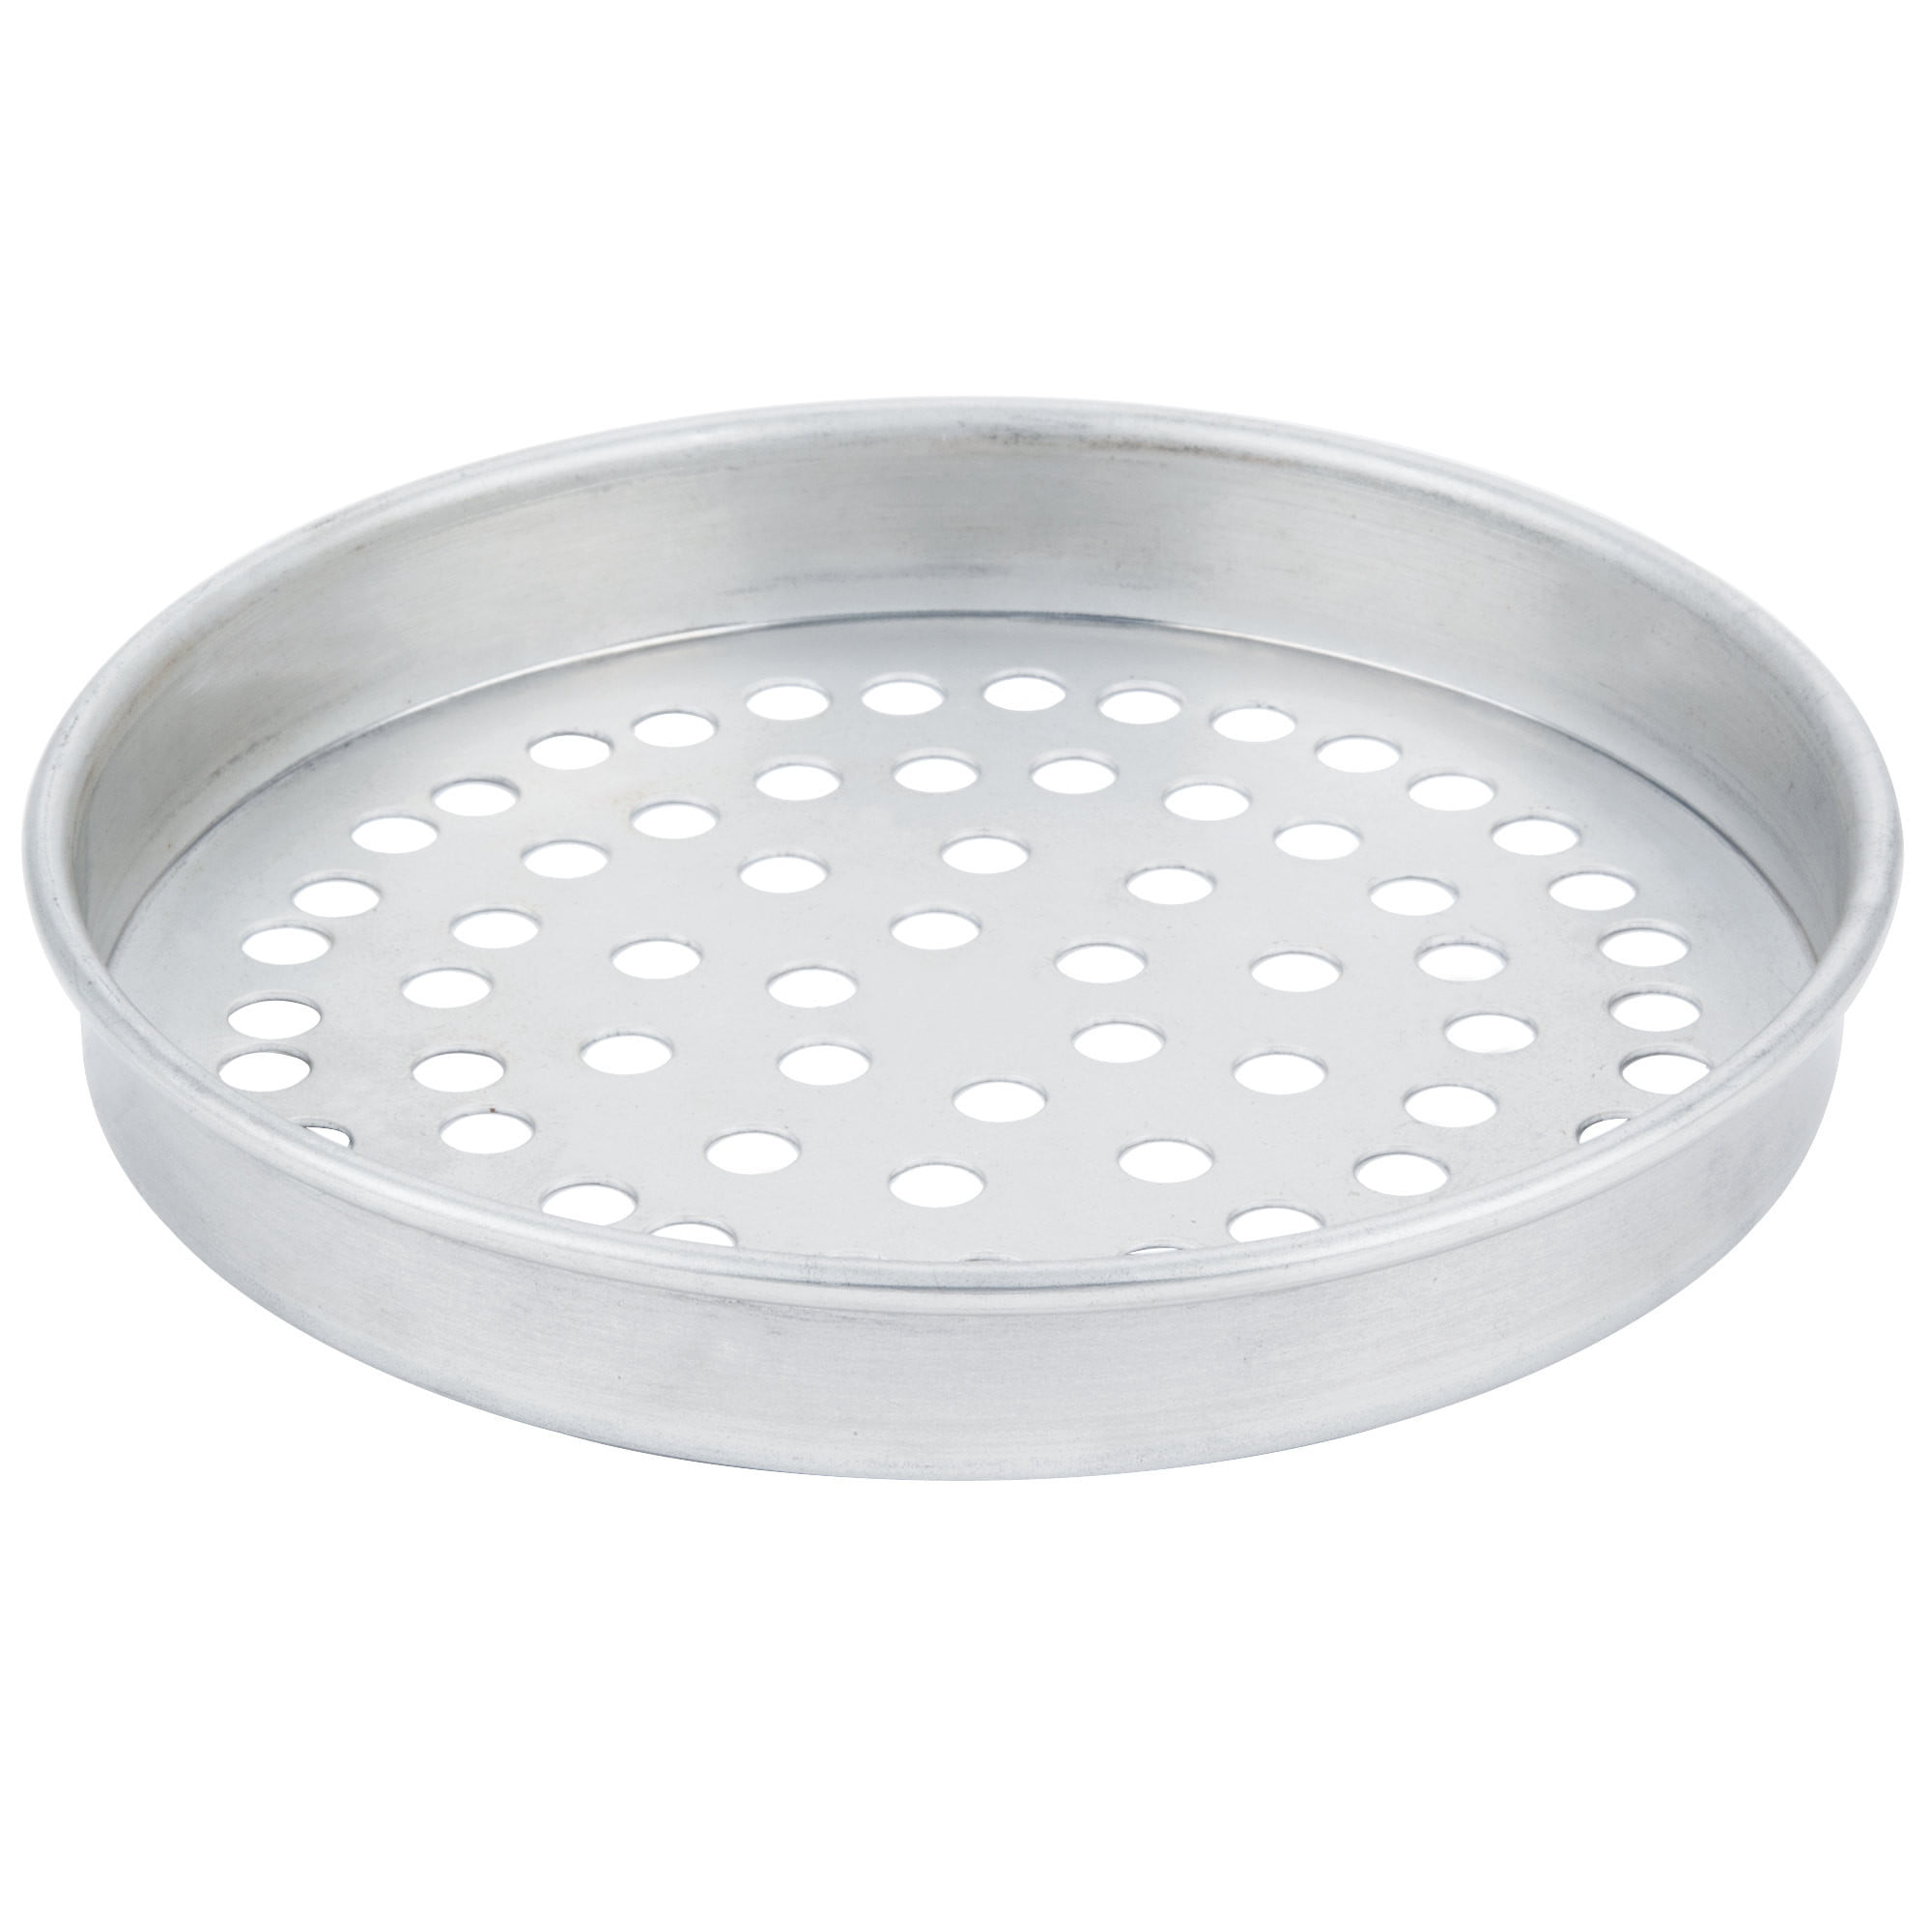 6" Perforated Pizza Pan 